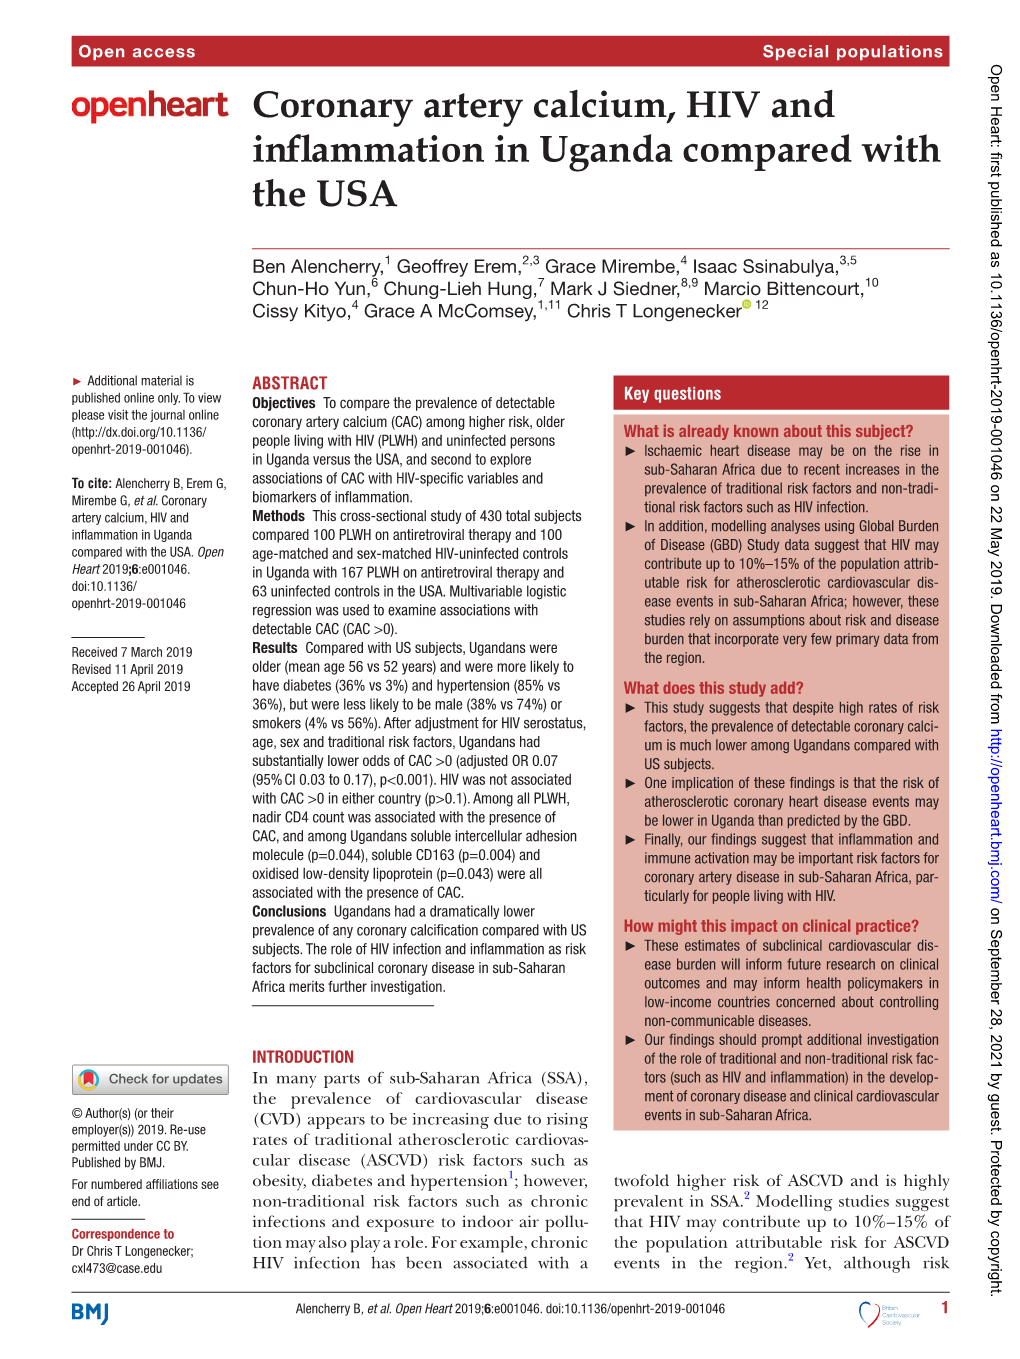 Coronary Artery Calcium, HIV and Inflammation in Uganda Compared with the USA